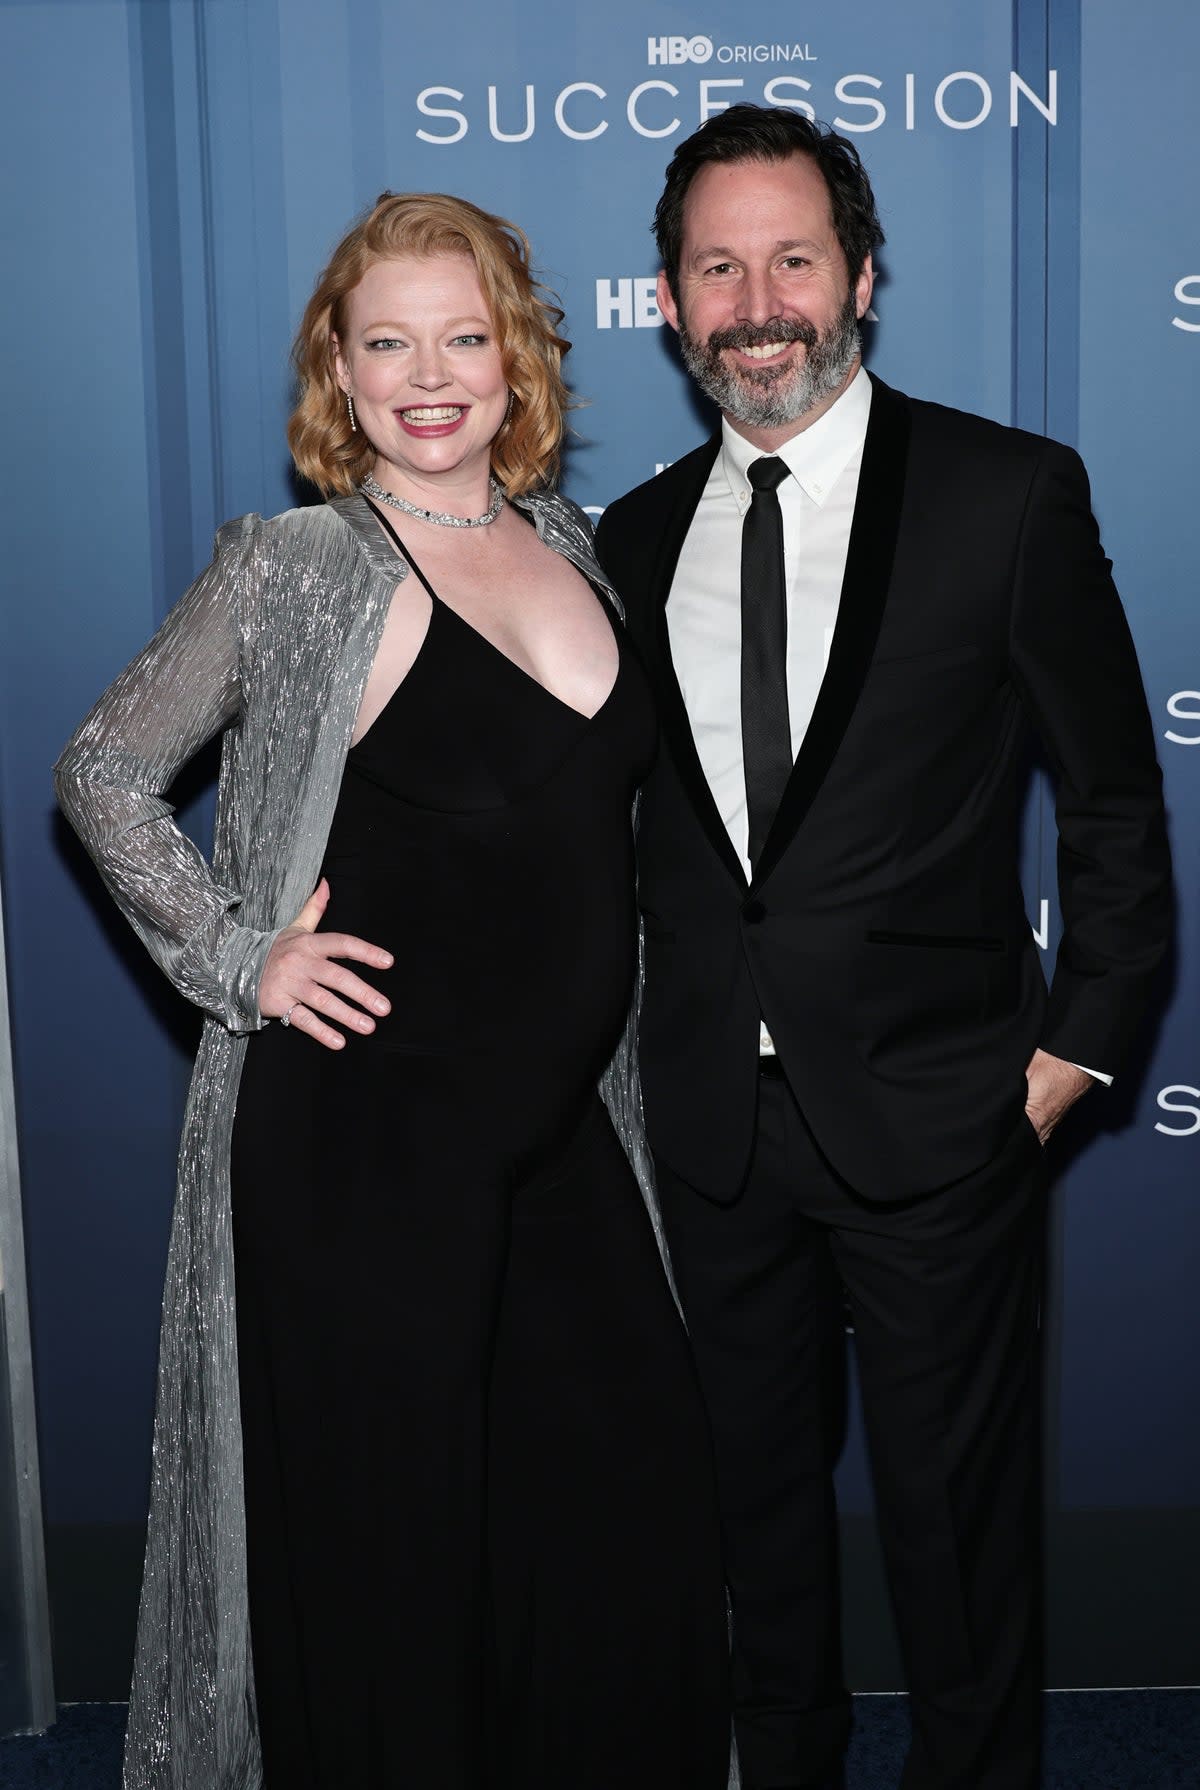 Sarah Snook and Dave Lawson attend the HBO's 